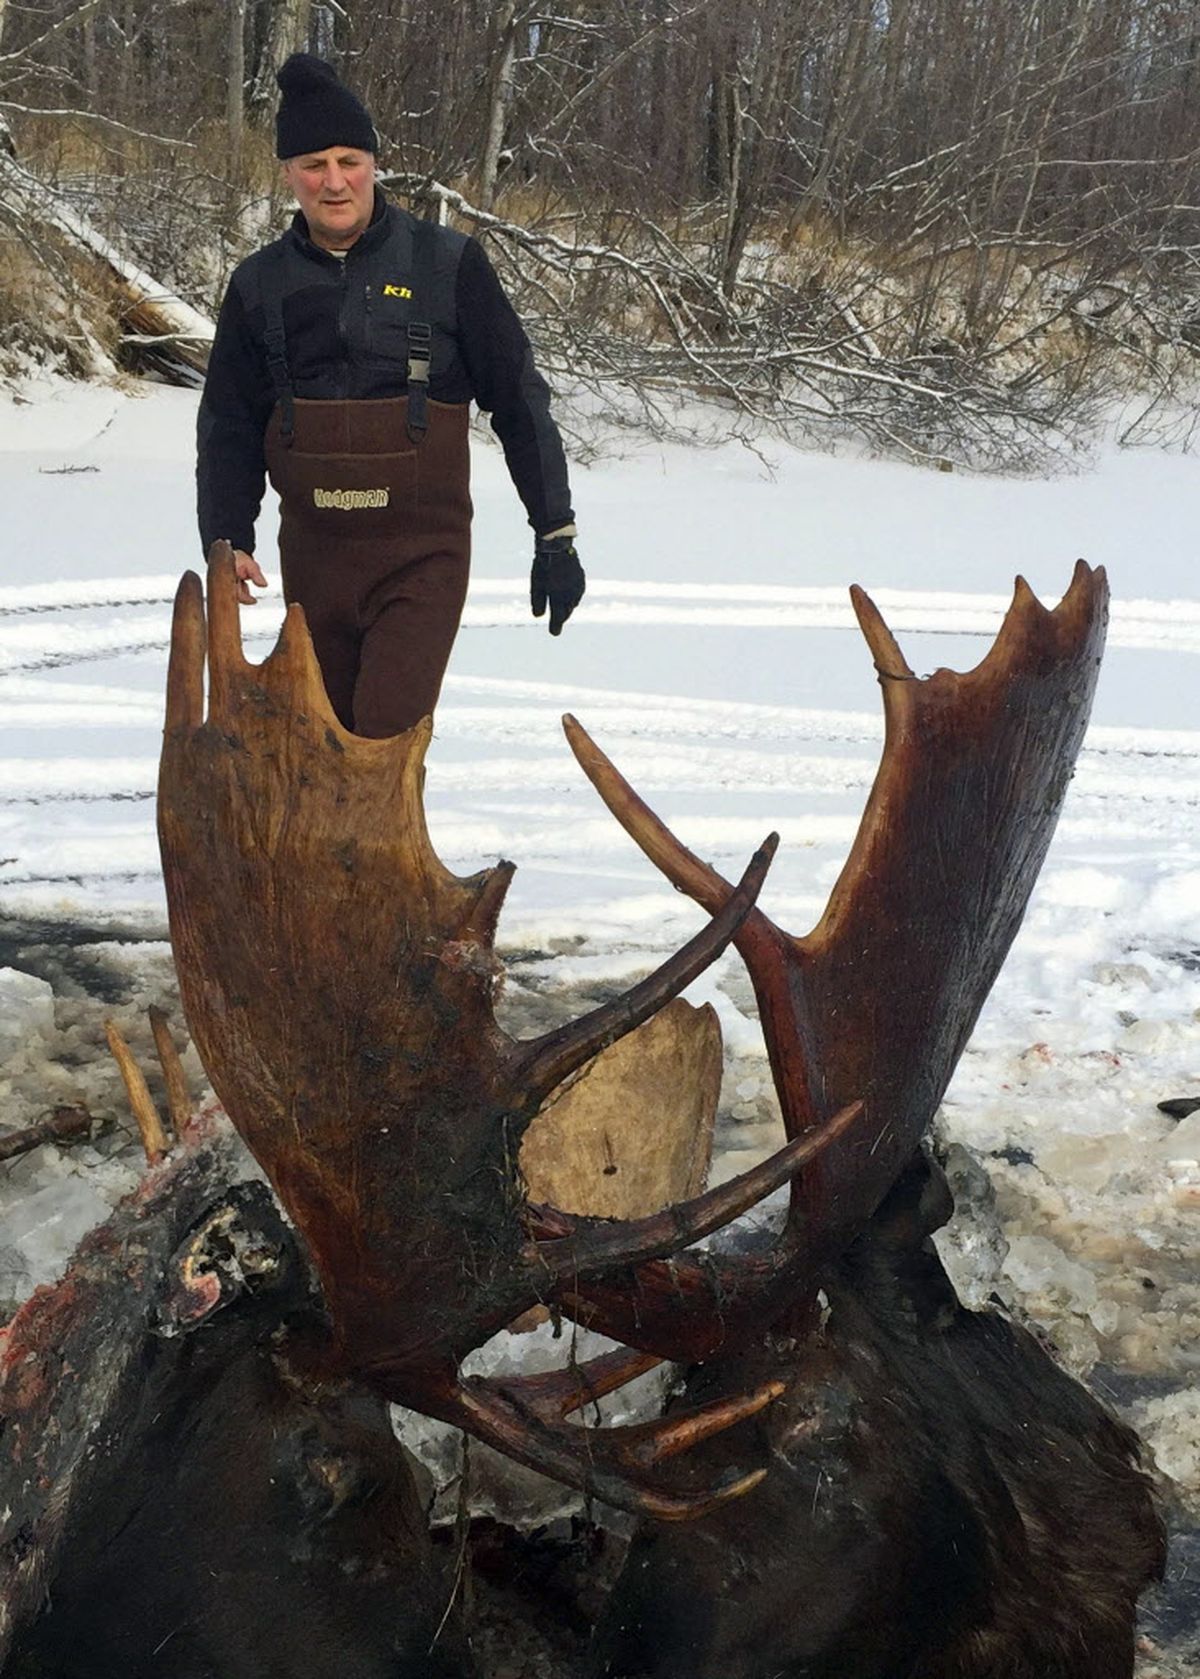 This Nov. 12, 2016 photo, provided by Jeff Erickson shows two moose frozen mid-fight and encased in ice near the remote village of Unalakleet, Alaska, on the state